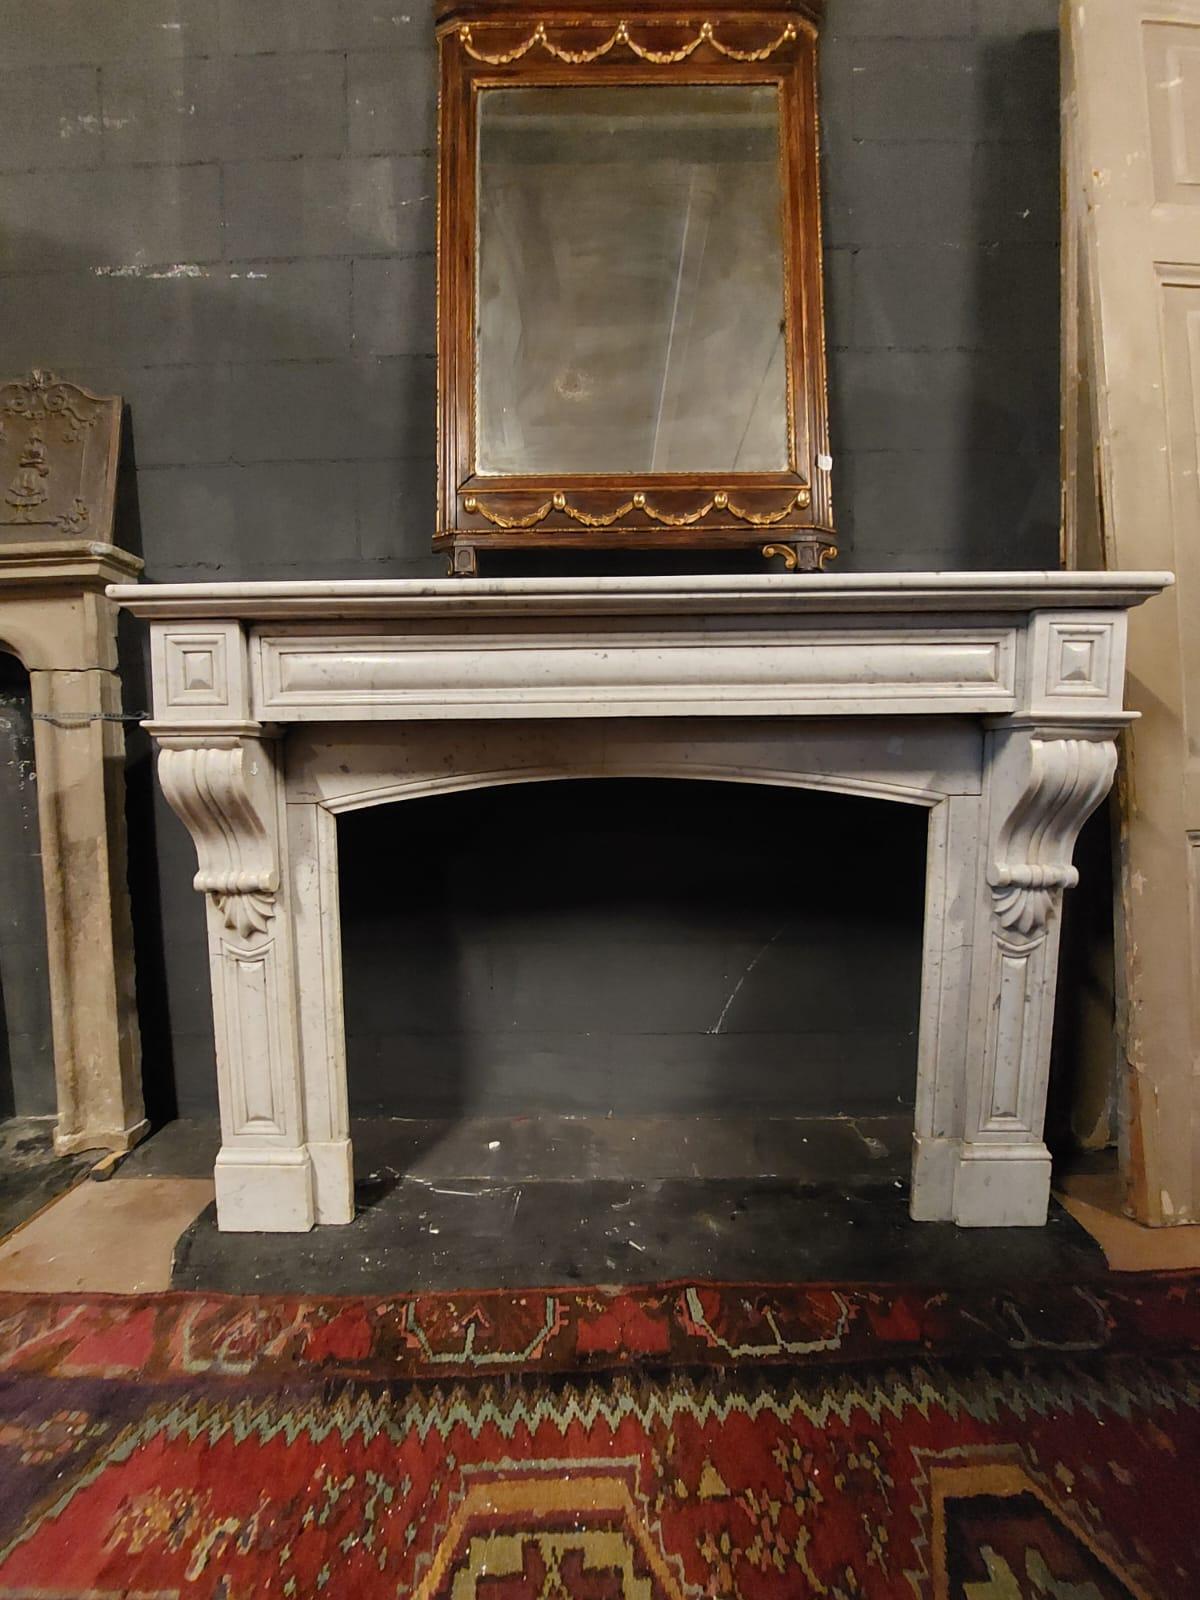 Ancient fireplace mantle, carved with geometric motifs in white Carrara marble, built as a hearth in the 19th century for a noble palace in France.
Classic elegant fireplace full of history, also adaptable to modern interiors thanks to its clean